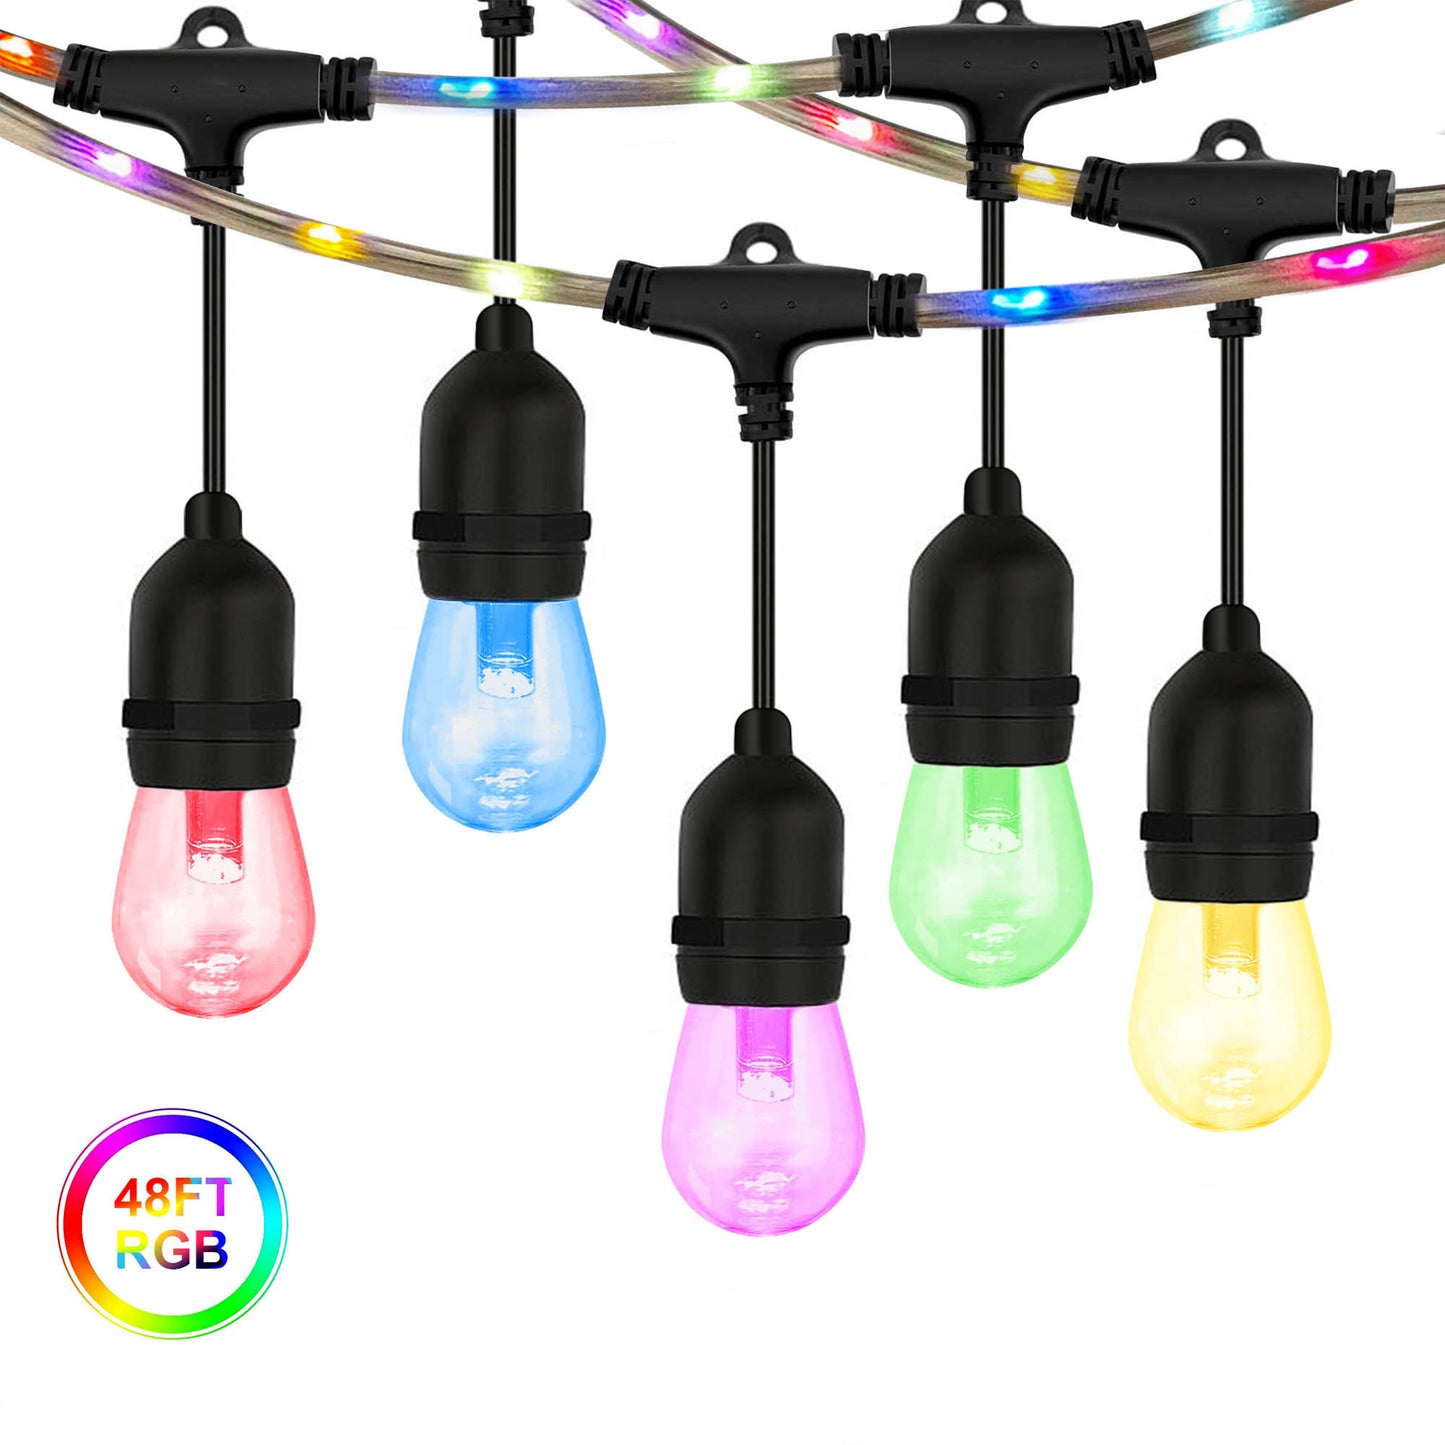 48FT RGB Outdoor String Lights